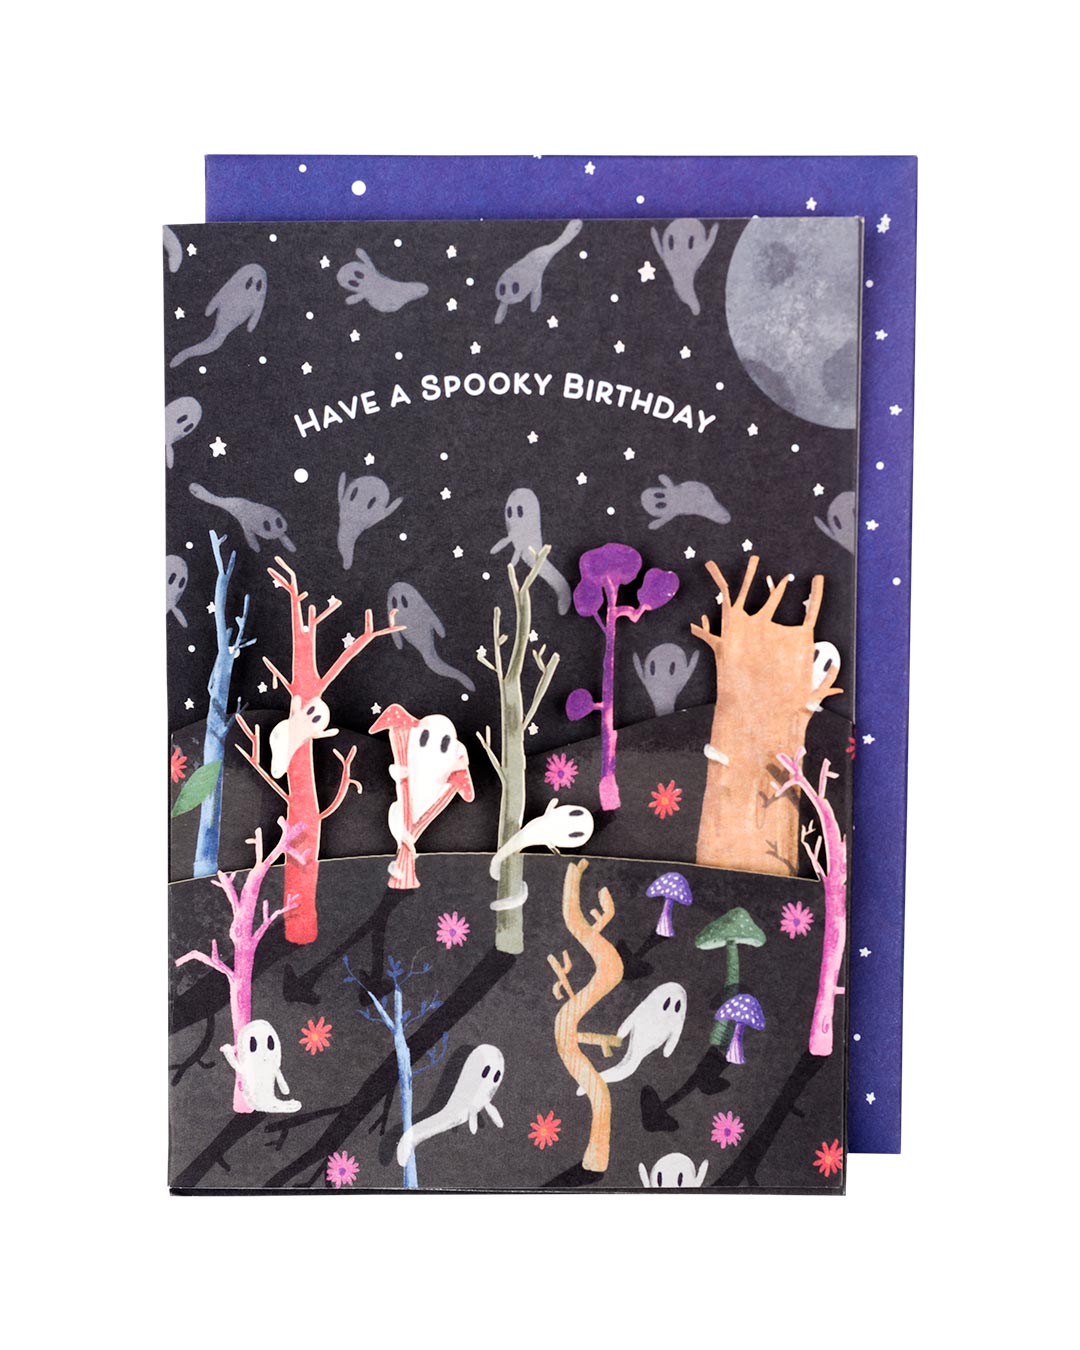 Papergang "Ghosts and Ghouls" Stationery Box (8633)